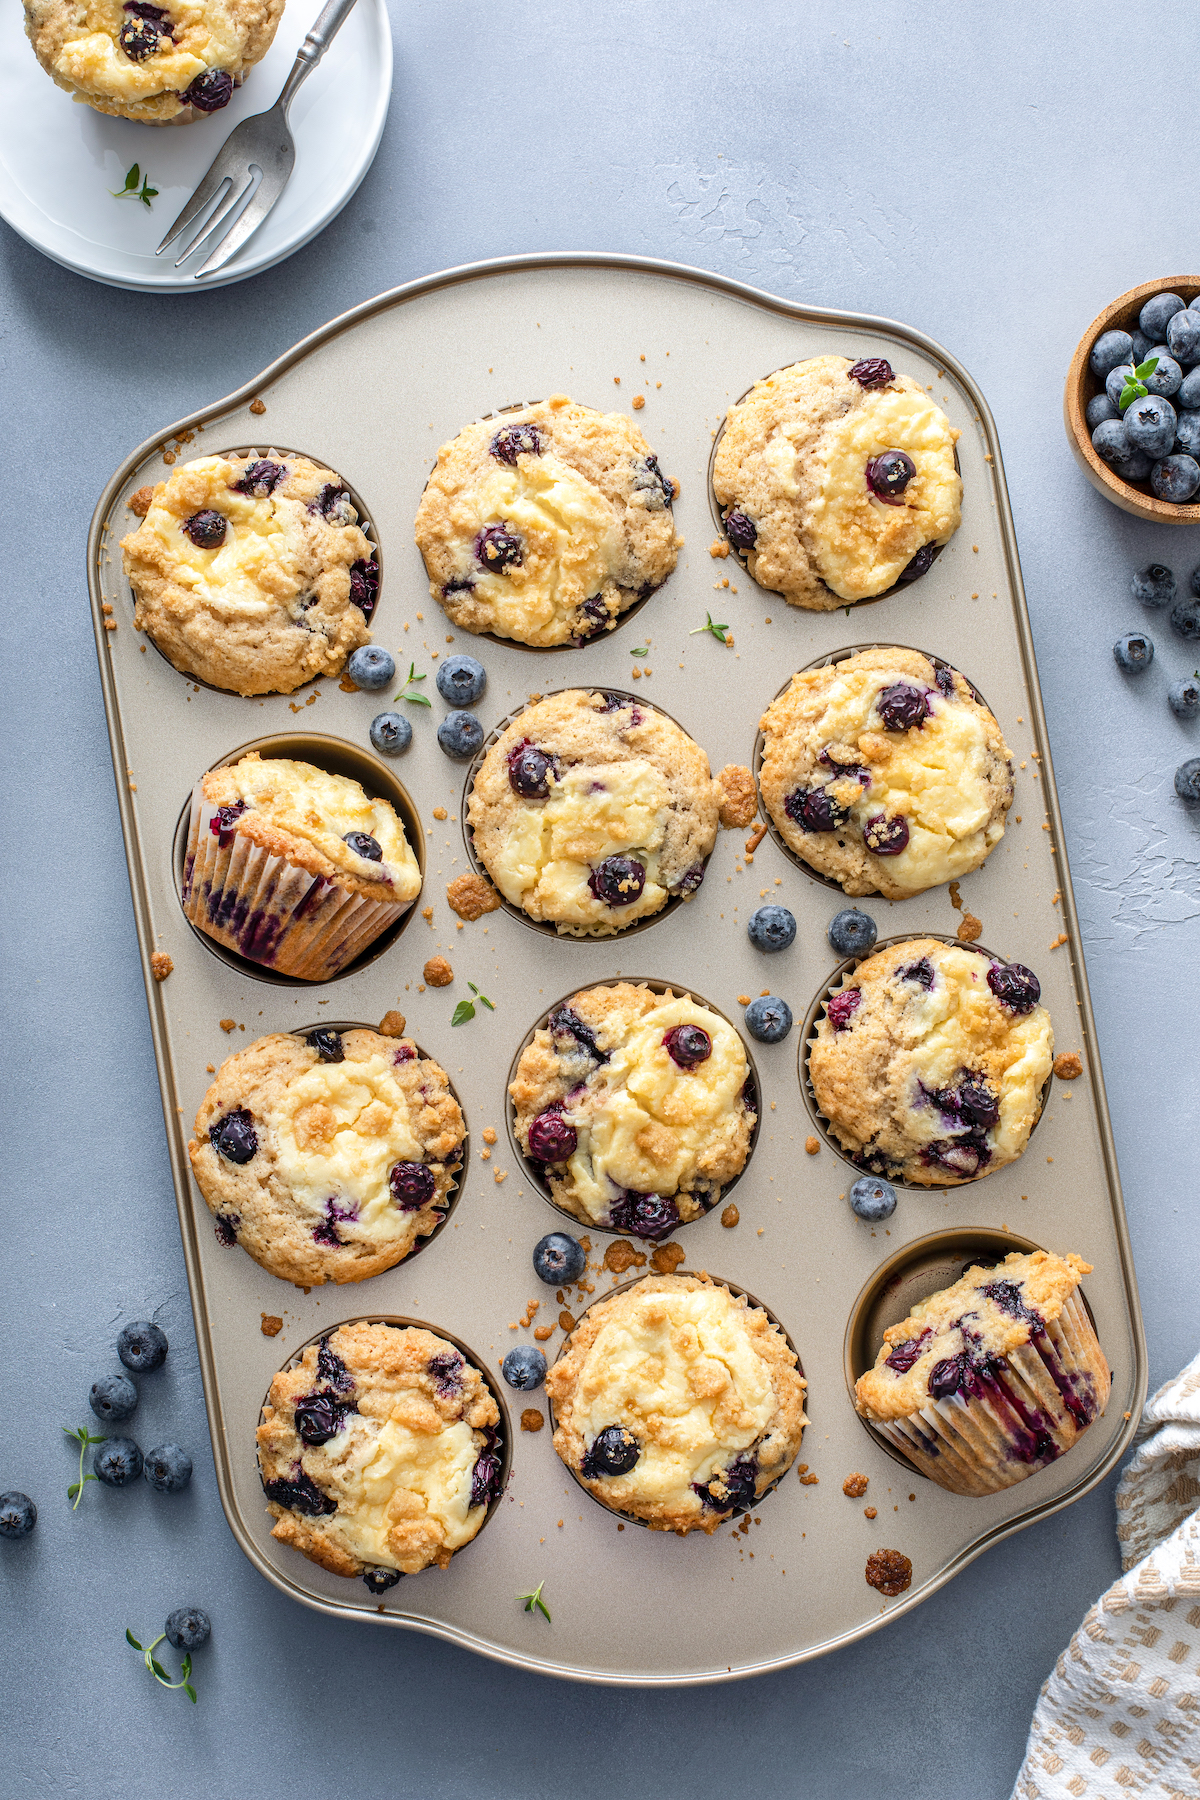 Baked blueberry muffins with cream cheese and streusel.